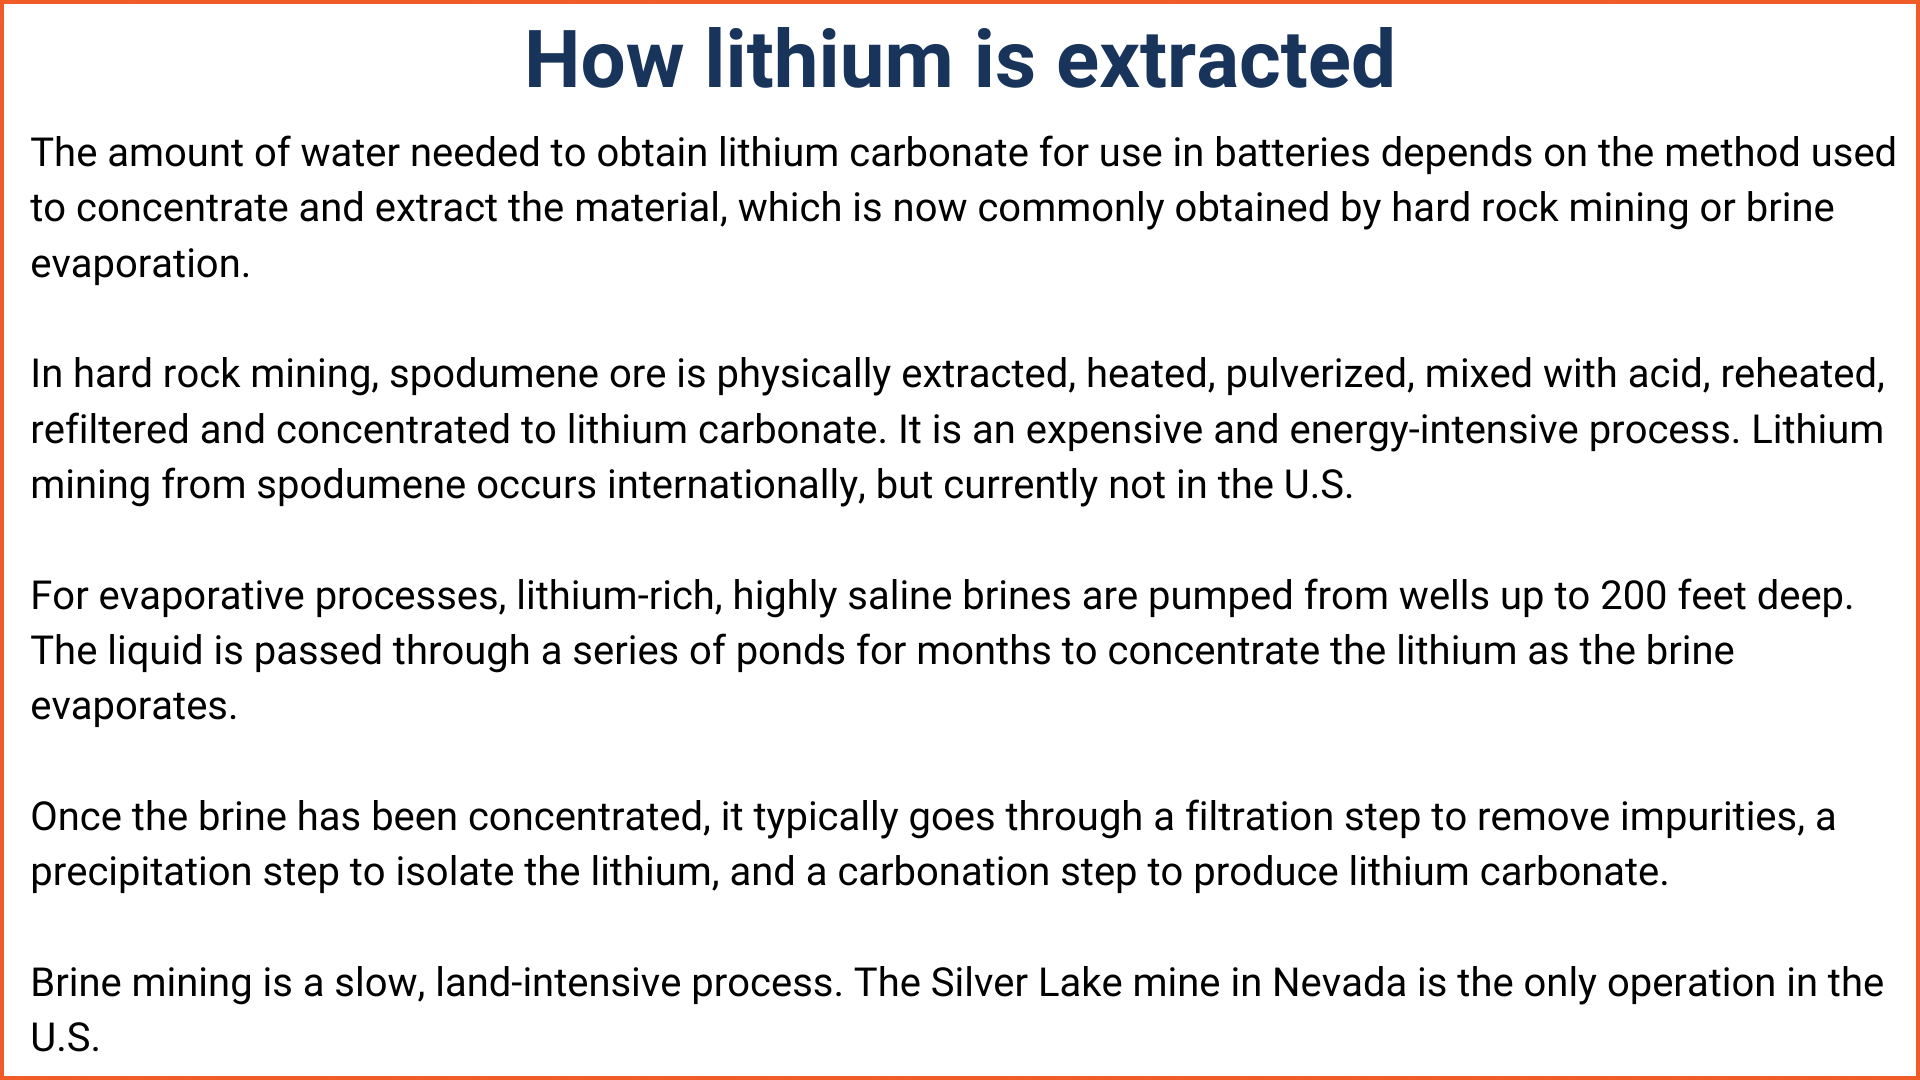 An explanation of how lithium is extracted. The amount of water needed to obtain lithium carbonate for use in batteries depends on the method used to concentrate and extract the material, which is now commonly obtained by hard rock mining or brine evaporation. In hard rock mining, spodumene ore is physically extracted, heated, pulverized, mixed with acid, reheated, refiltered and concentrated to lithium carbonate. It is an expensive and energy-intensive process. Lithium mining from spodumene occurs internationally, but currently not in the U.S. For evaporative processes, lithium-rich, highly saline brines are pumped from wells up to 200 feet deep. The liquid is passed through a series of ponds for months to concentrate the lithium as the brine evaporates. Once the brine has been concentrated, it typically goes through a filtration step to remove impurities, a precipitation step to isolate the lithium, and a carbonation step to produce lithium carbonate. Brine mining is a slow, land-intensive process. The Silver Lake mine in Nevada is the only operation in the U.S.